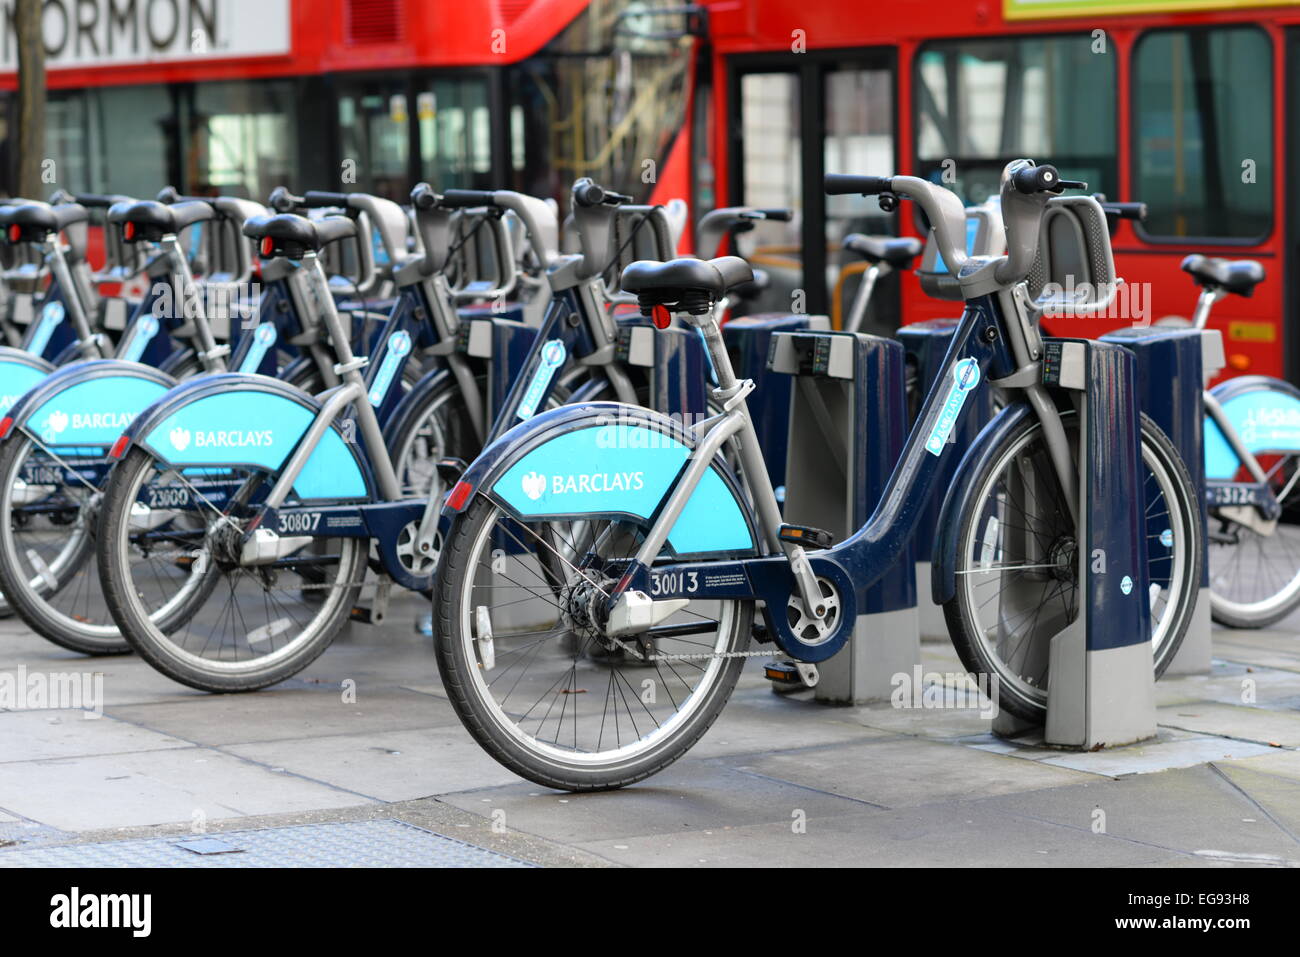 Blue Barclays Boris bikes line up on a street with red London buses behind Stock Photo